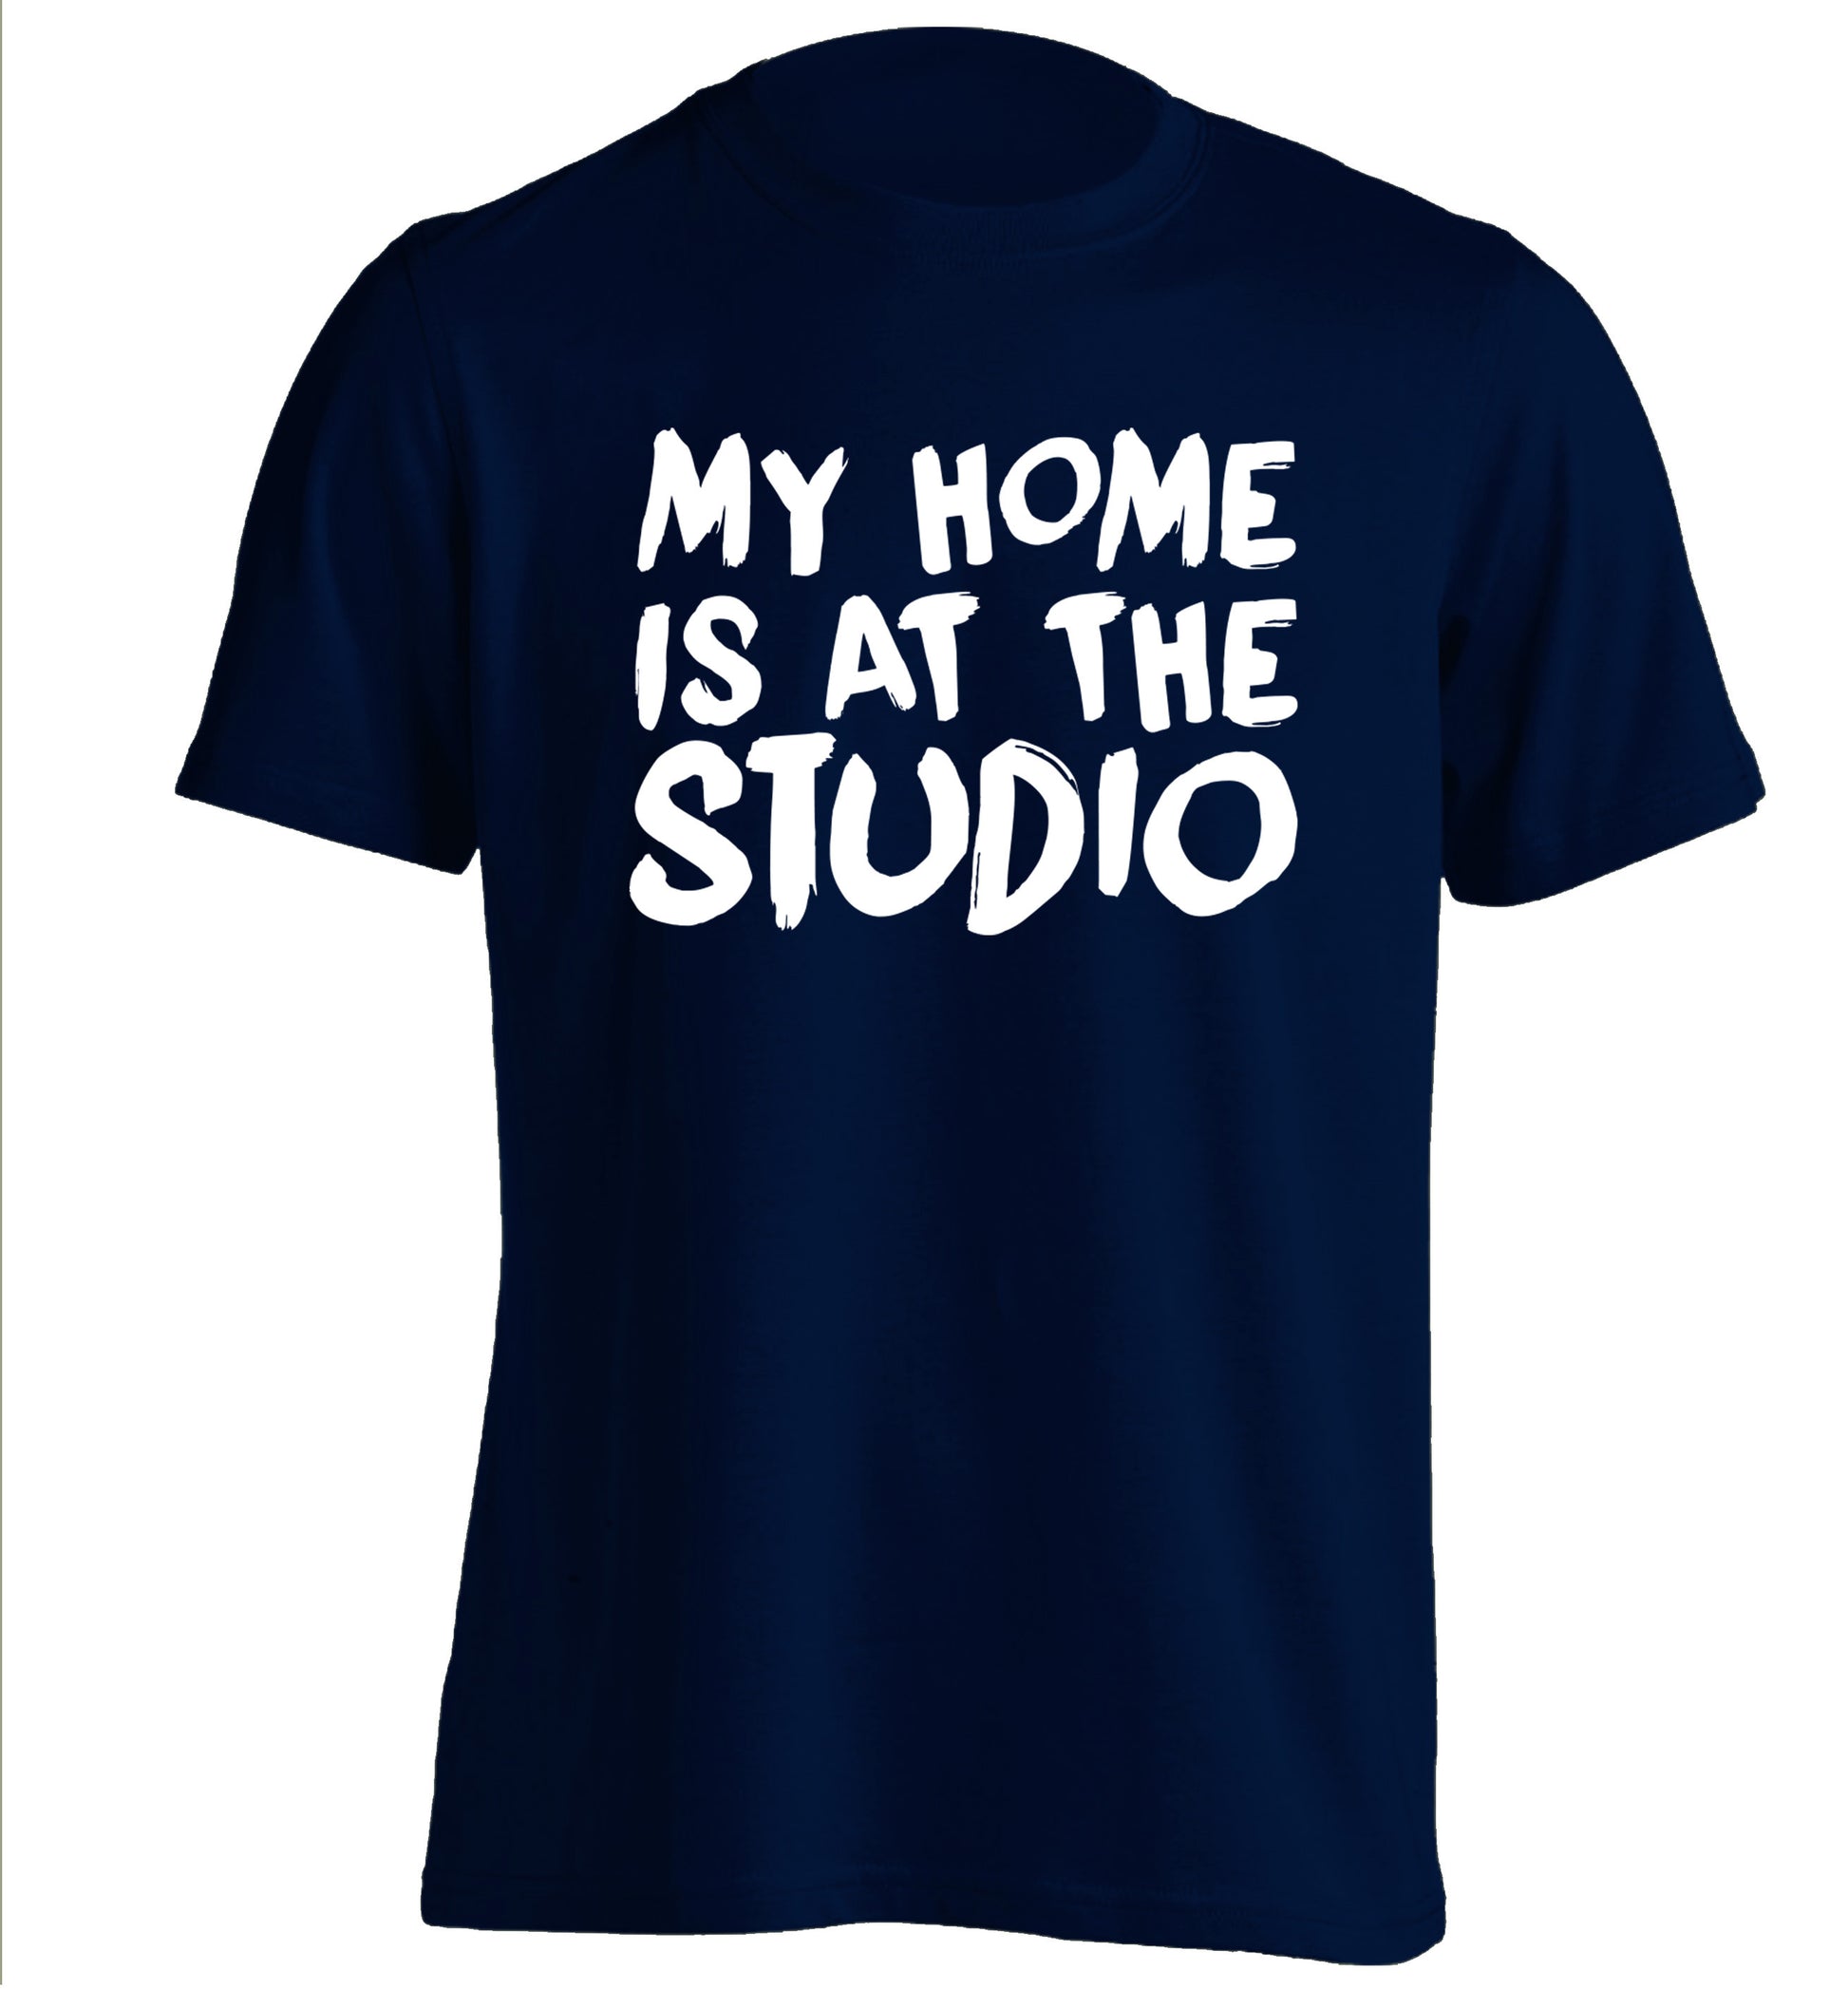 My home is at the studio adults unisex navy Tshirt 2XL